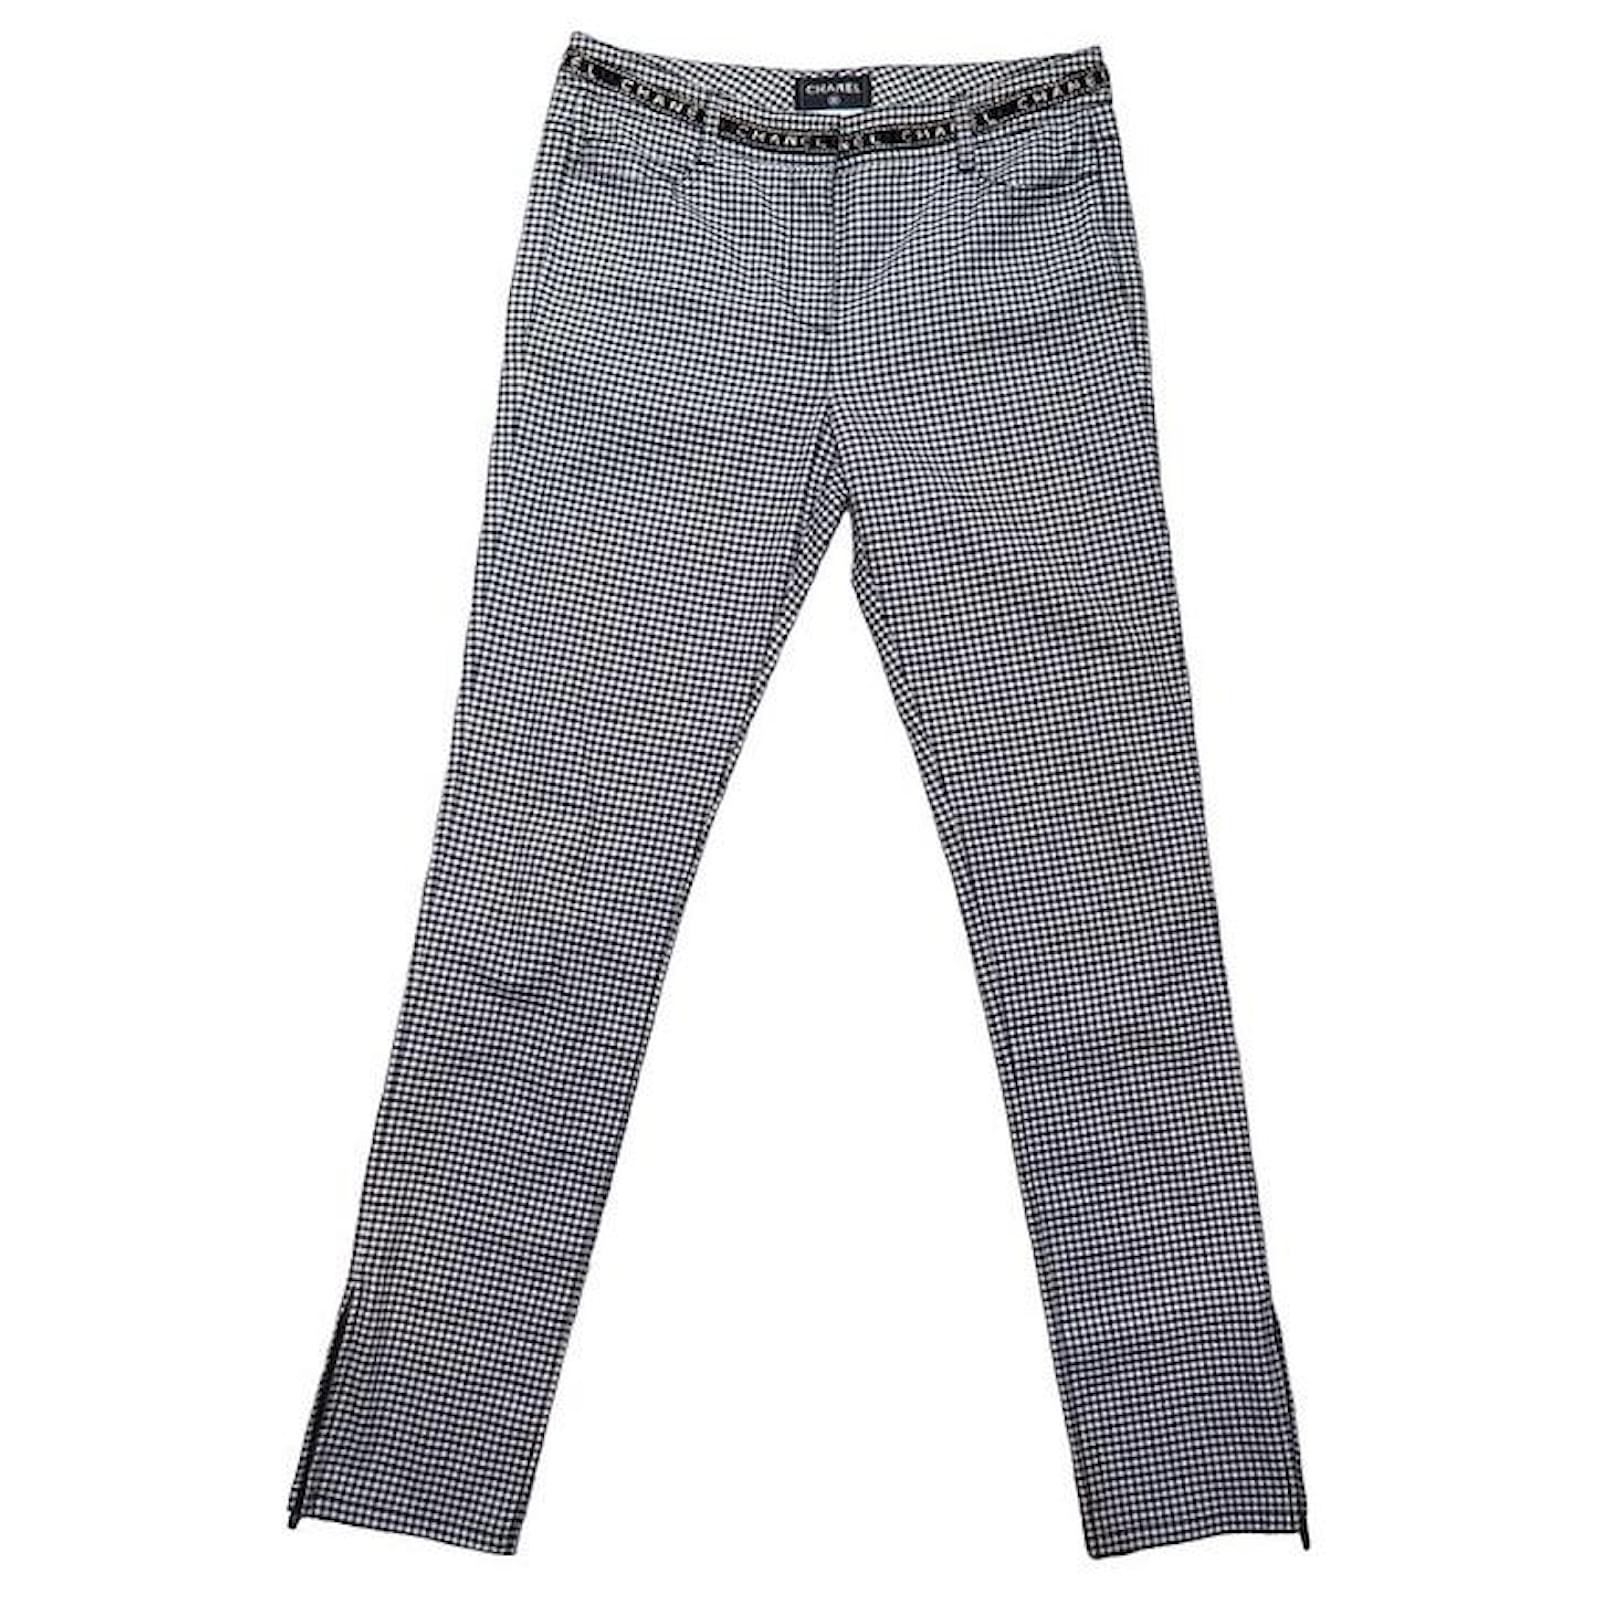 NEW CHANEL PANTS WITH GINGHAM CHECK M 38 P53371V28957 COTTON